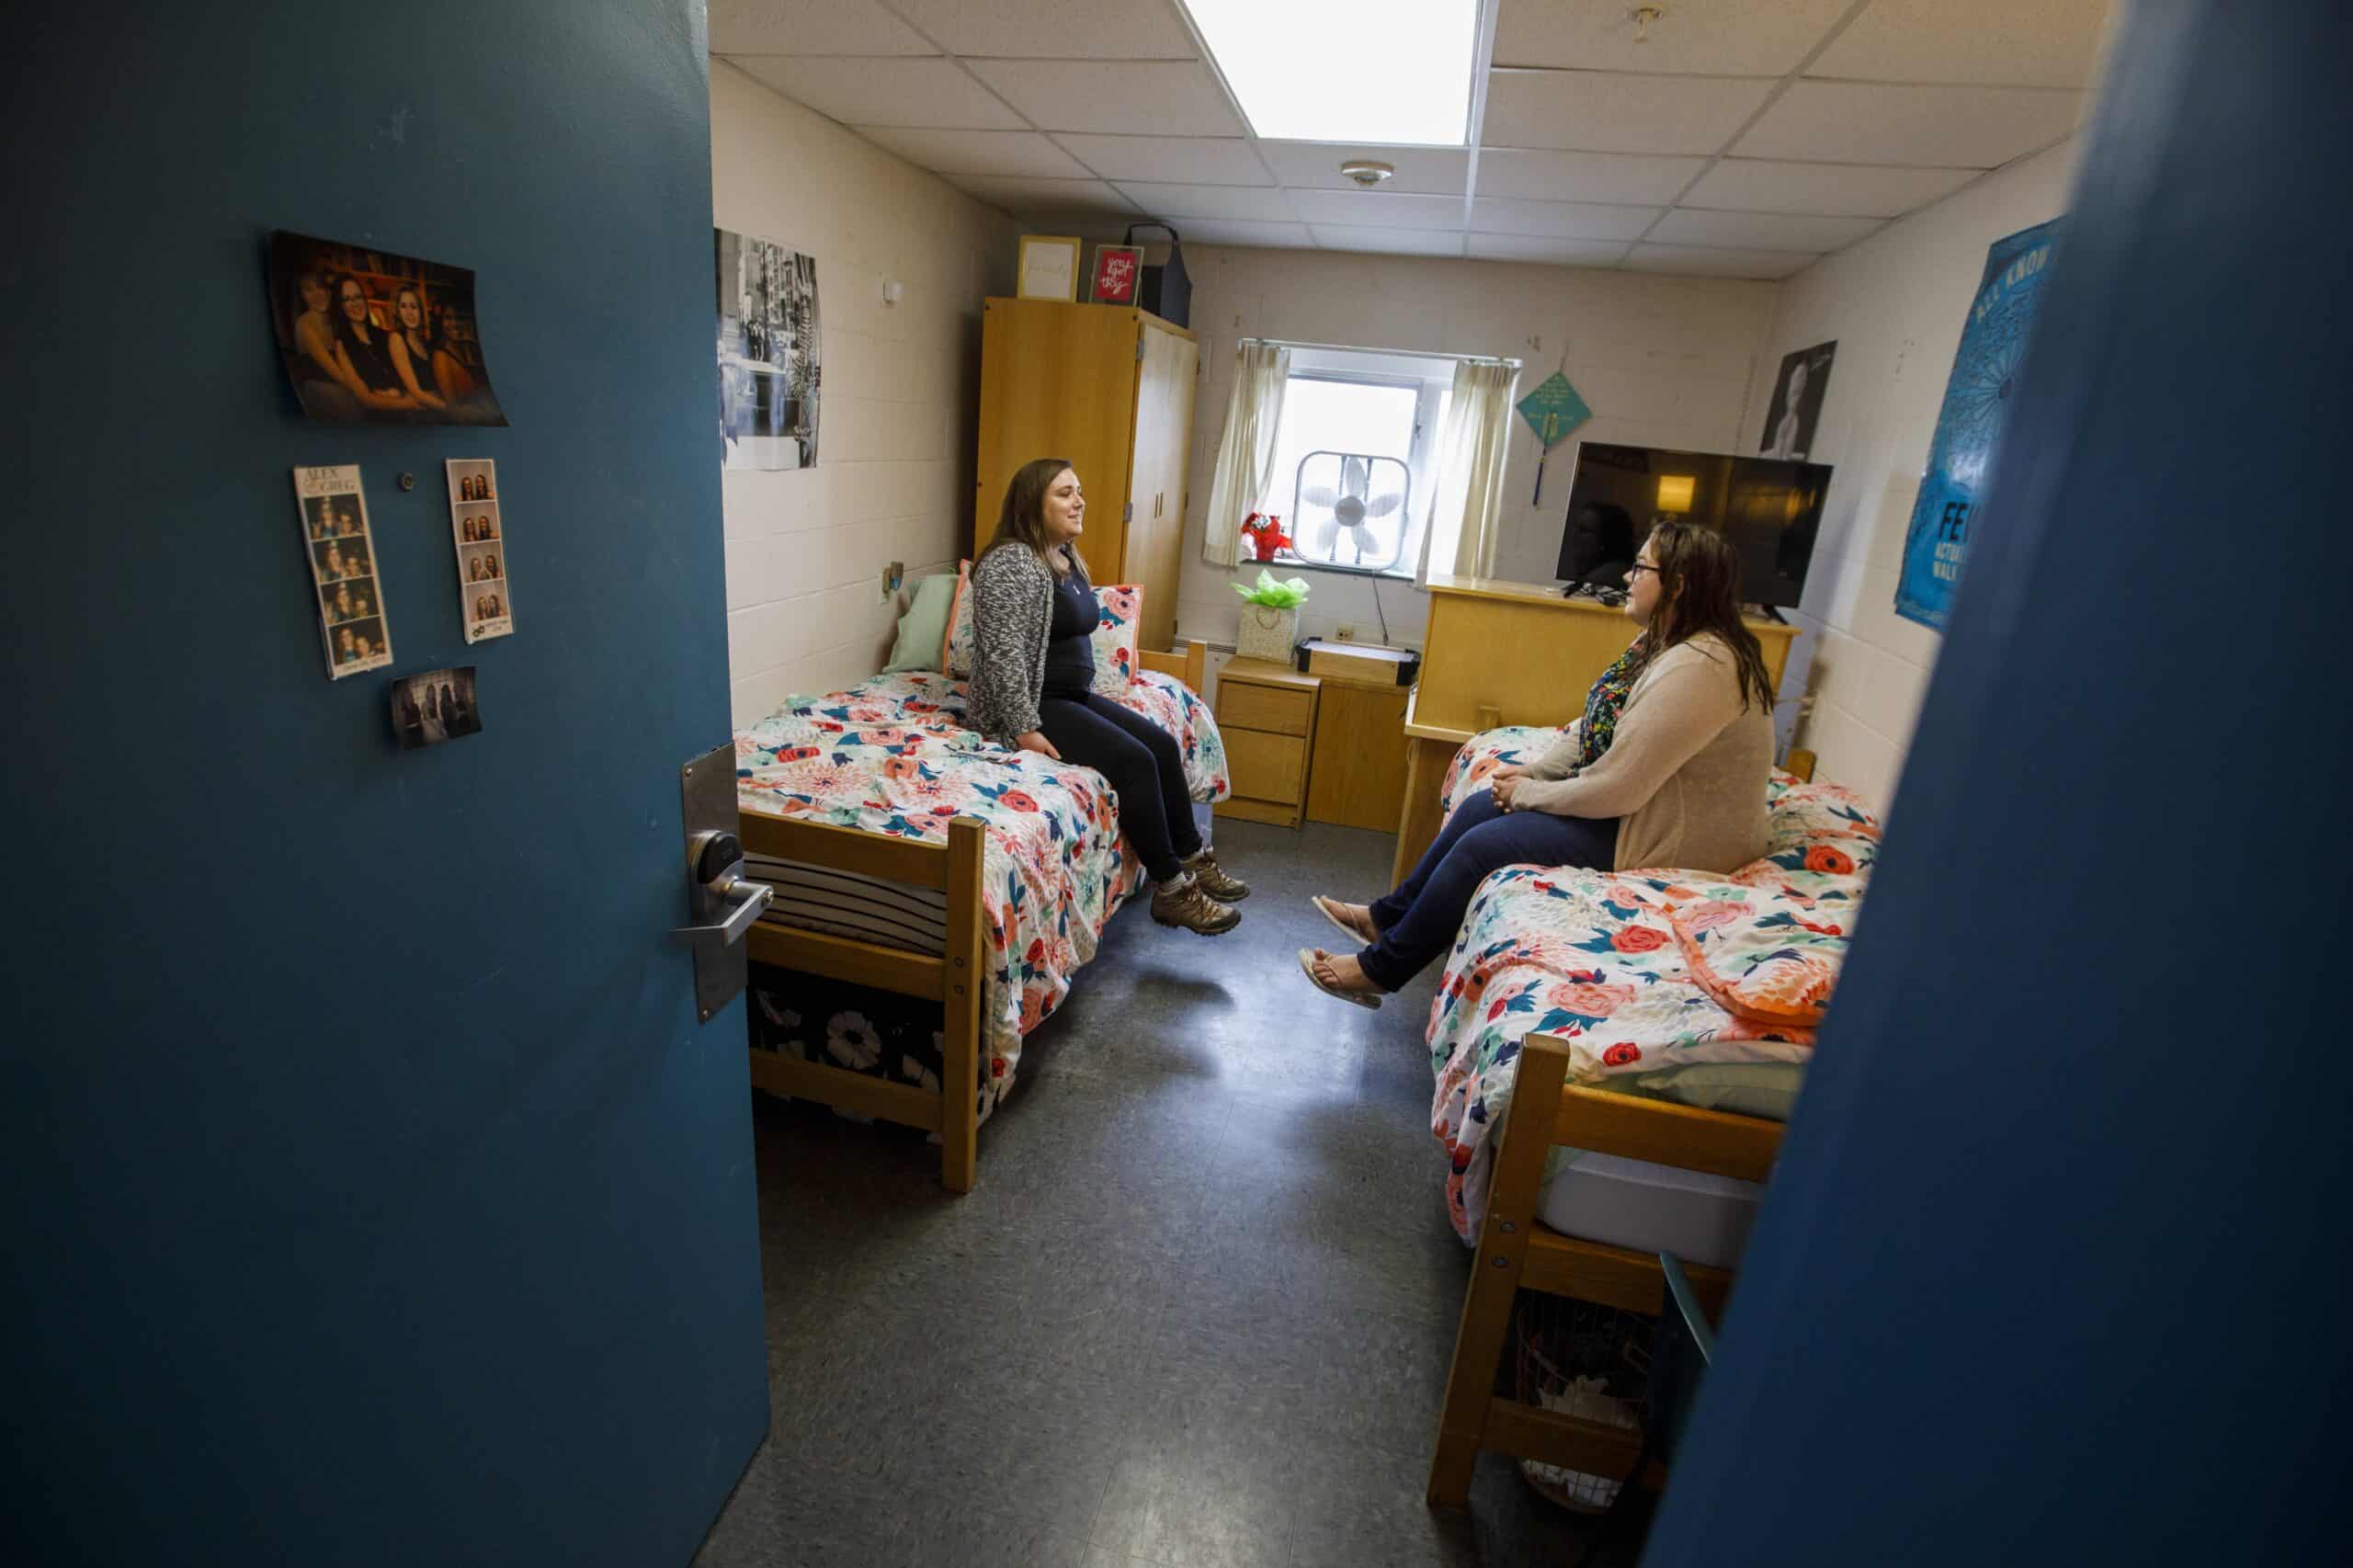 A dorm room with two beds on either side of the room. There is a girl on each bed facing each other and talking, their feet are dangling off the beds.